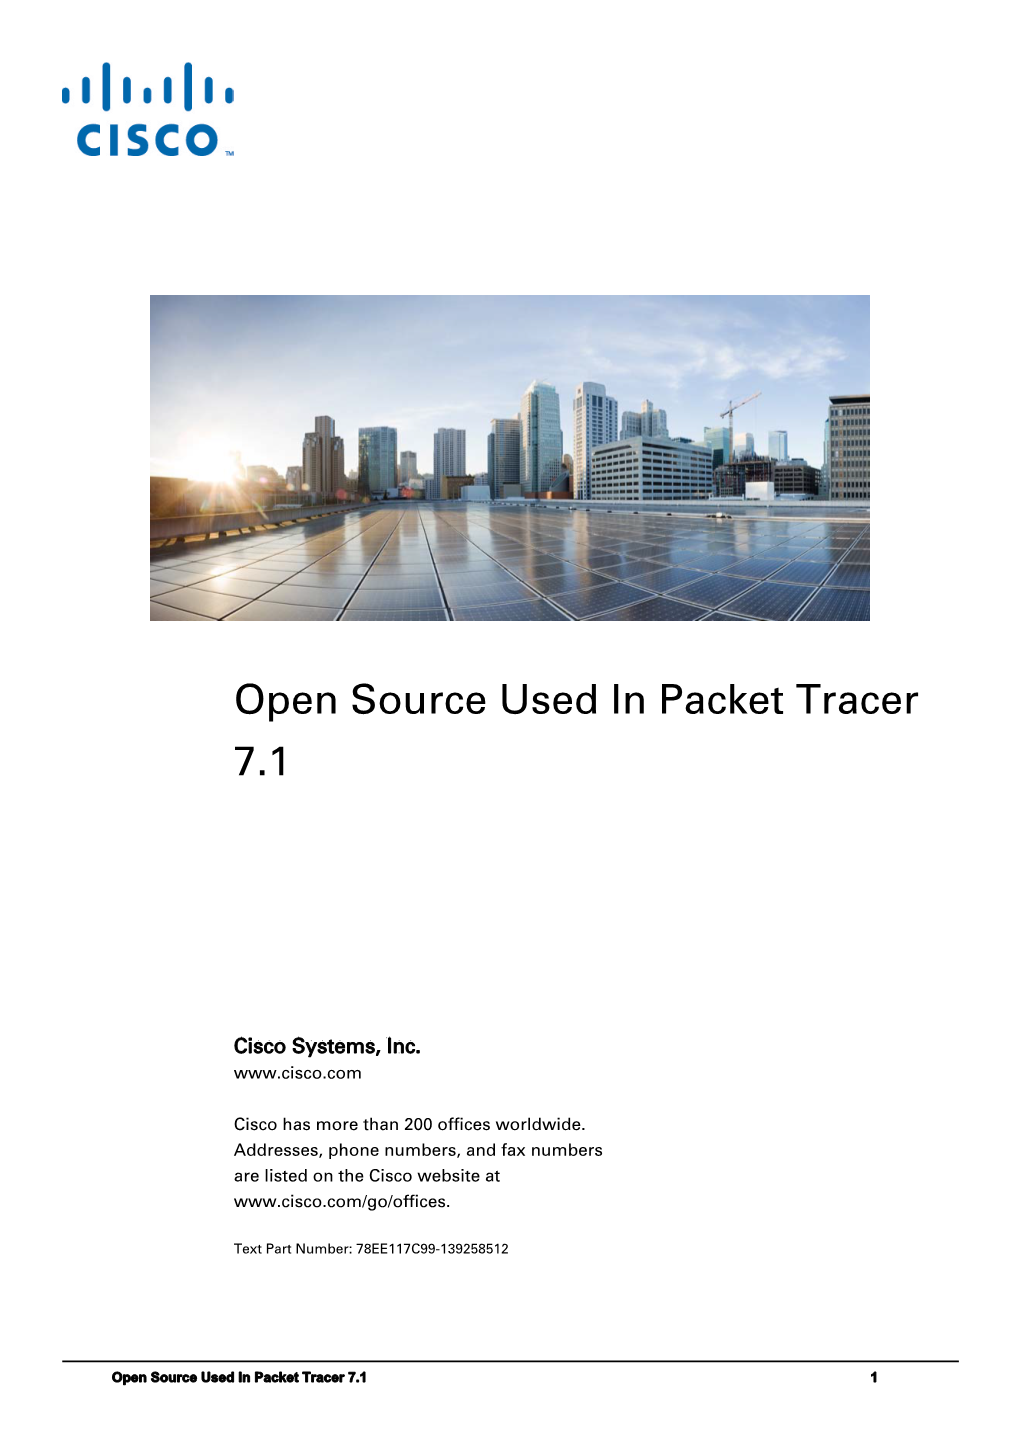 Packet Tracer 7.1